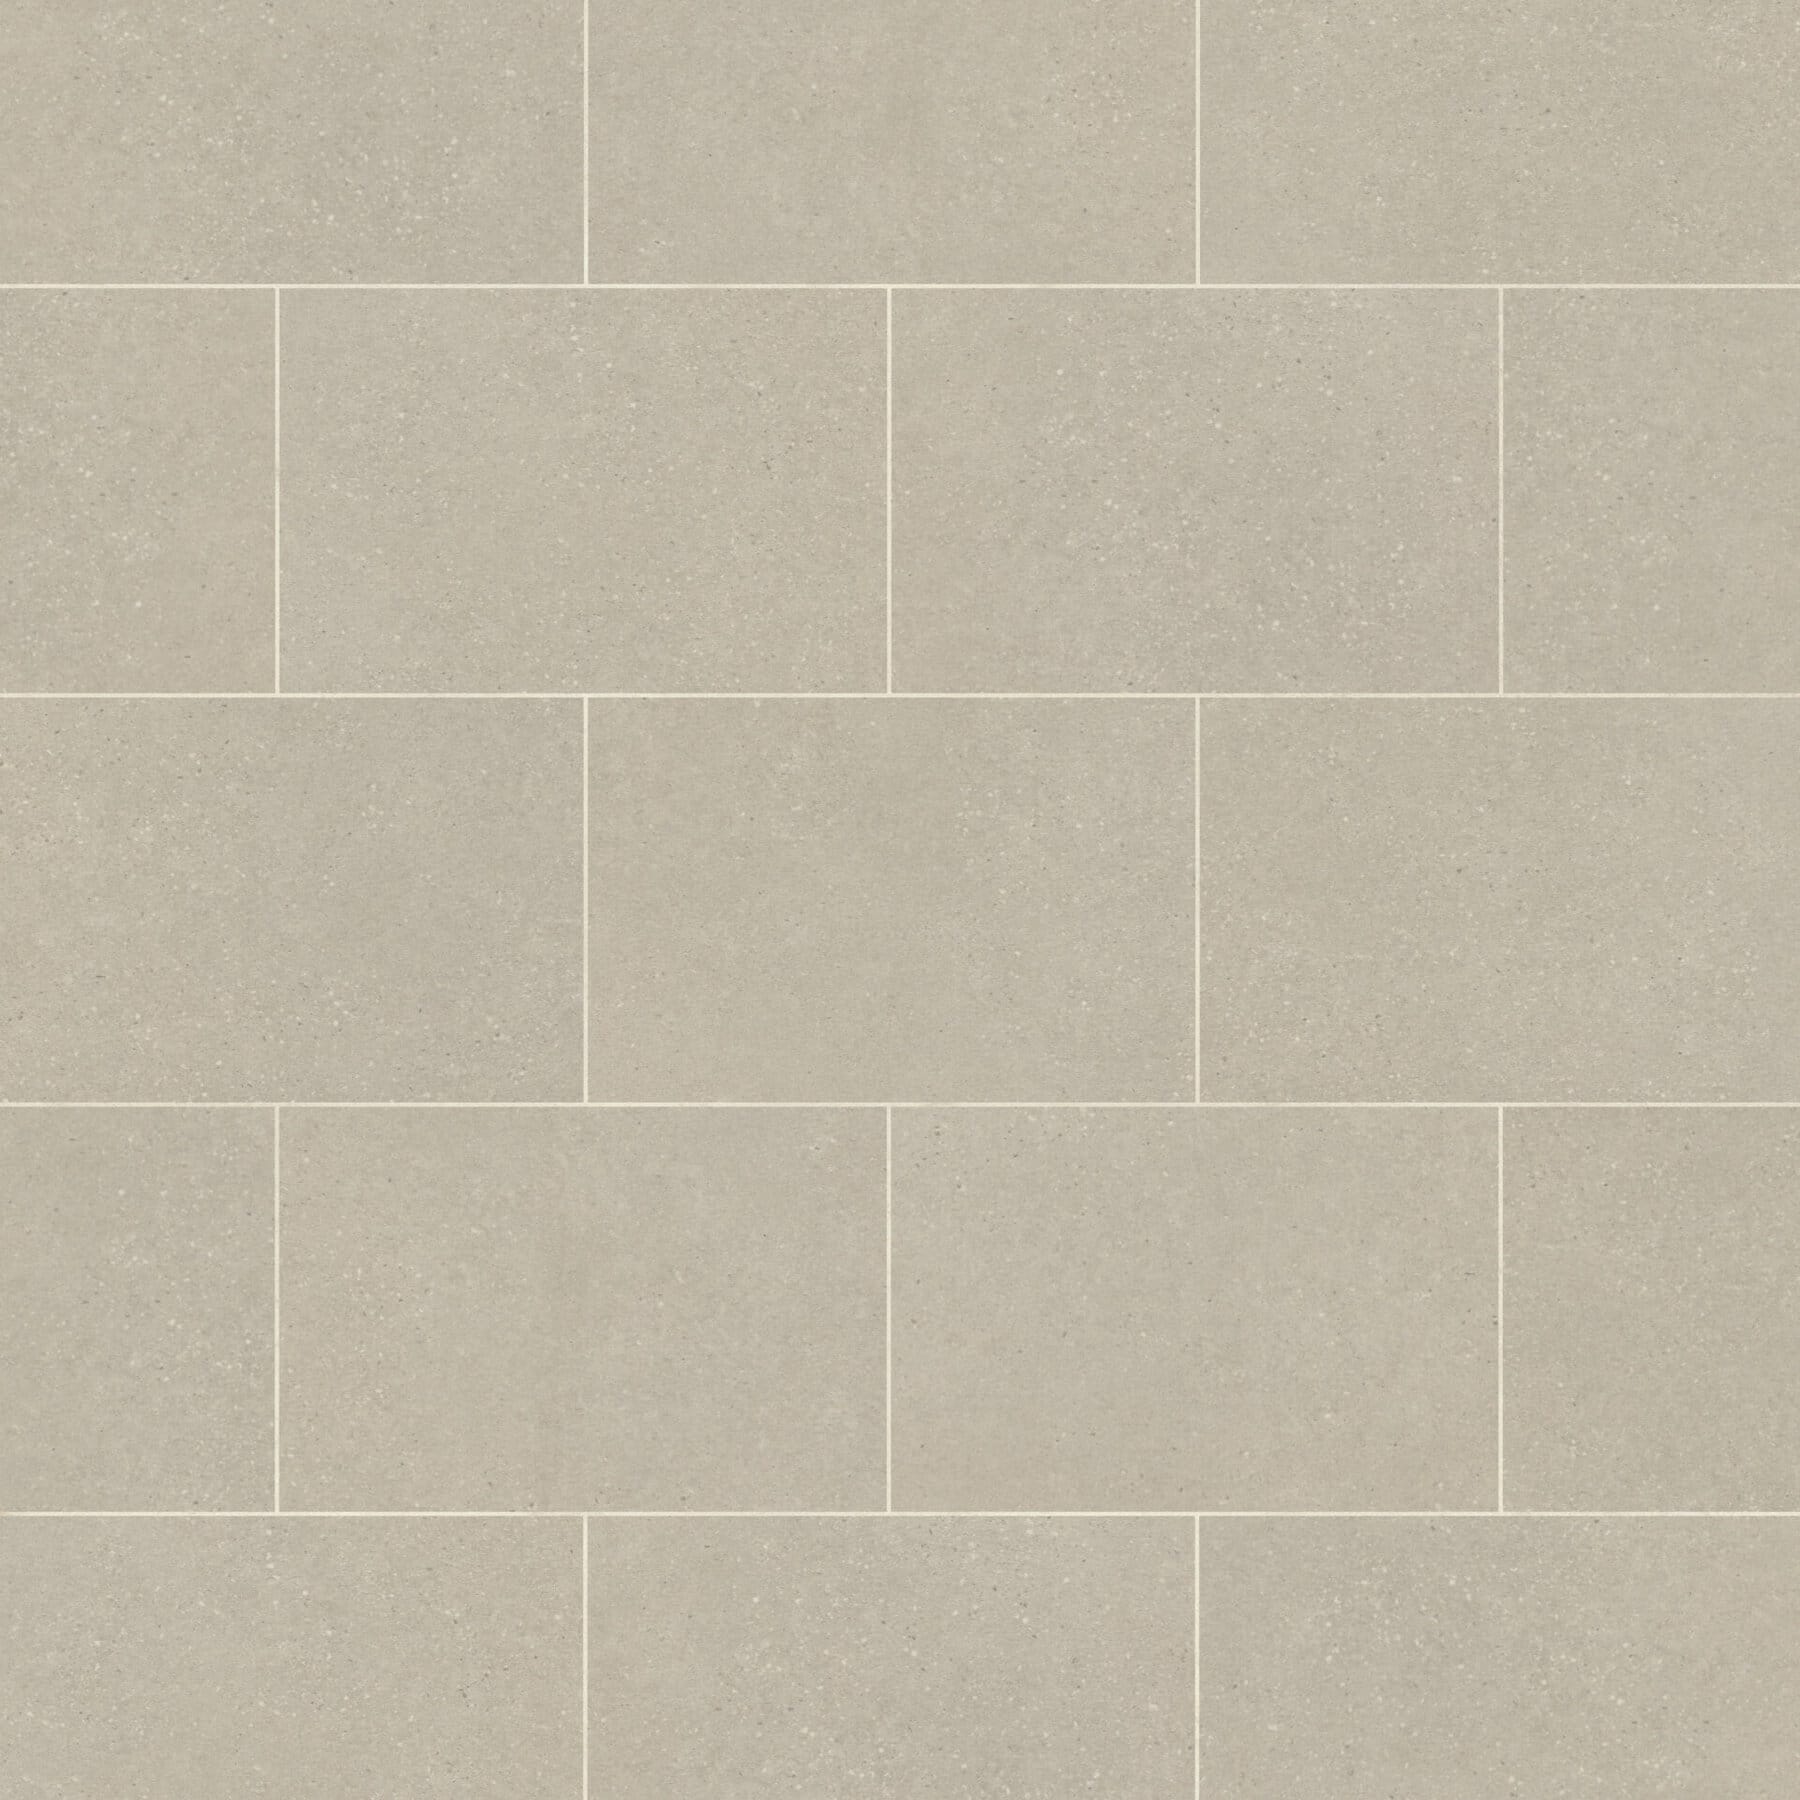 View of ST25 Lucerne Stone luxury vinyl tile by Karndean